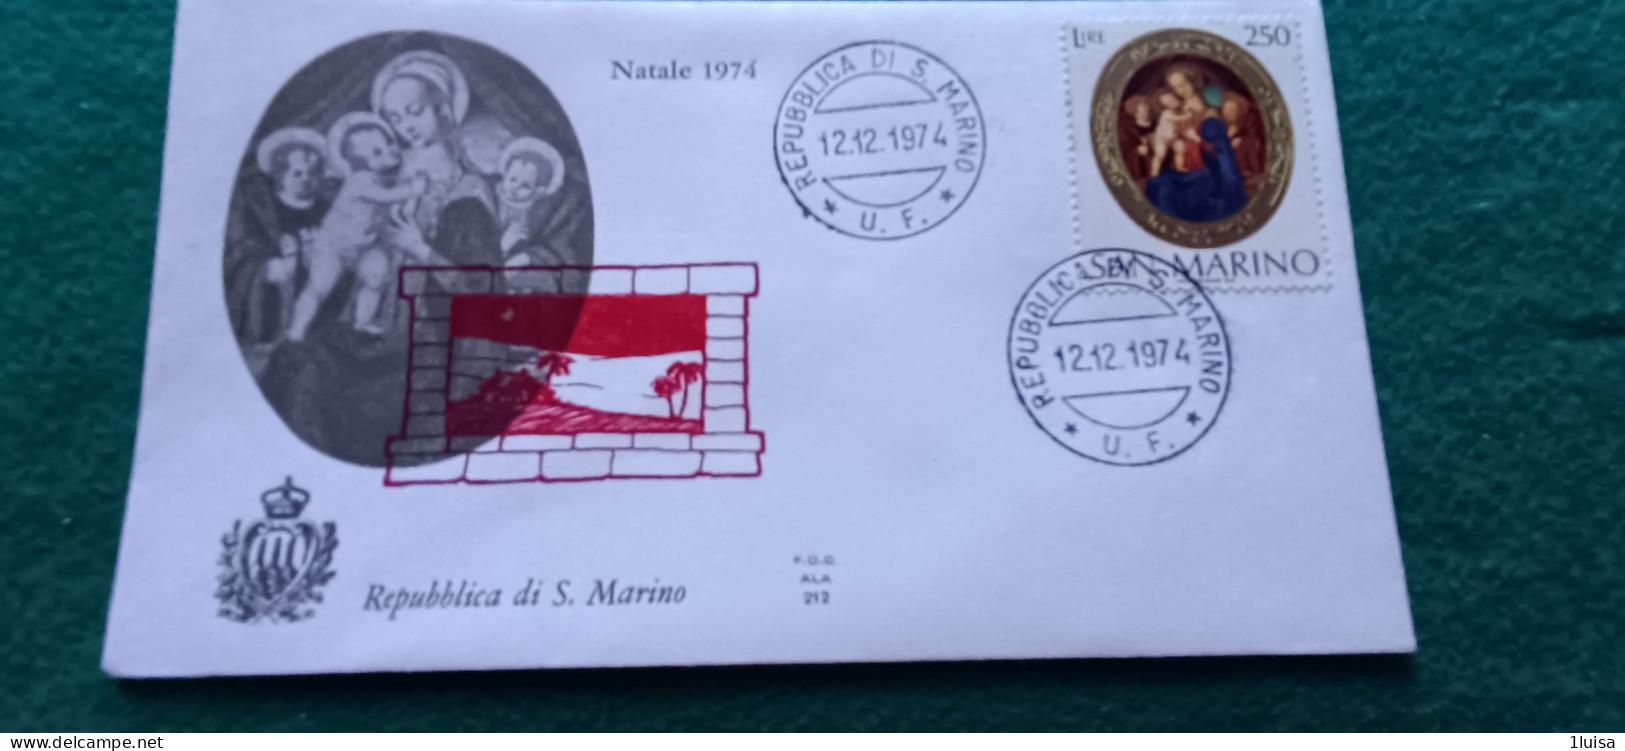 SAN MARINO 12/12/74 Natale - Express Letter Stamps